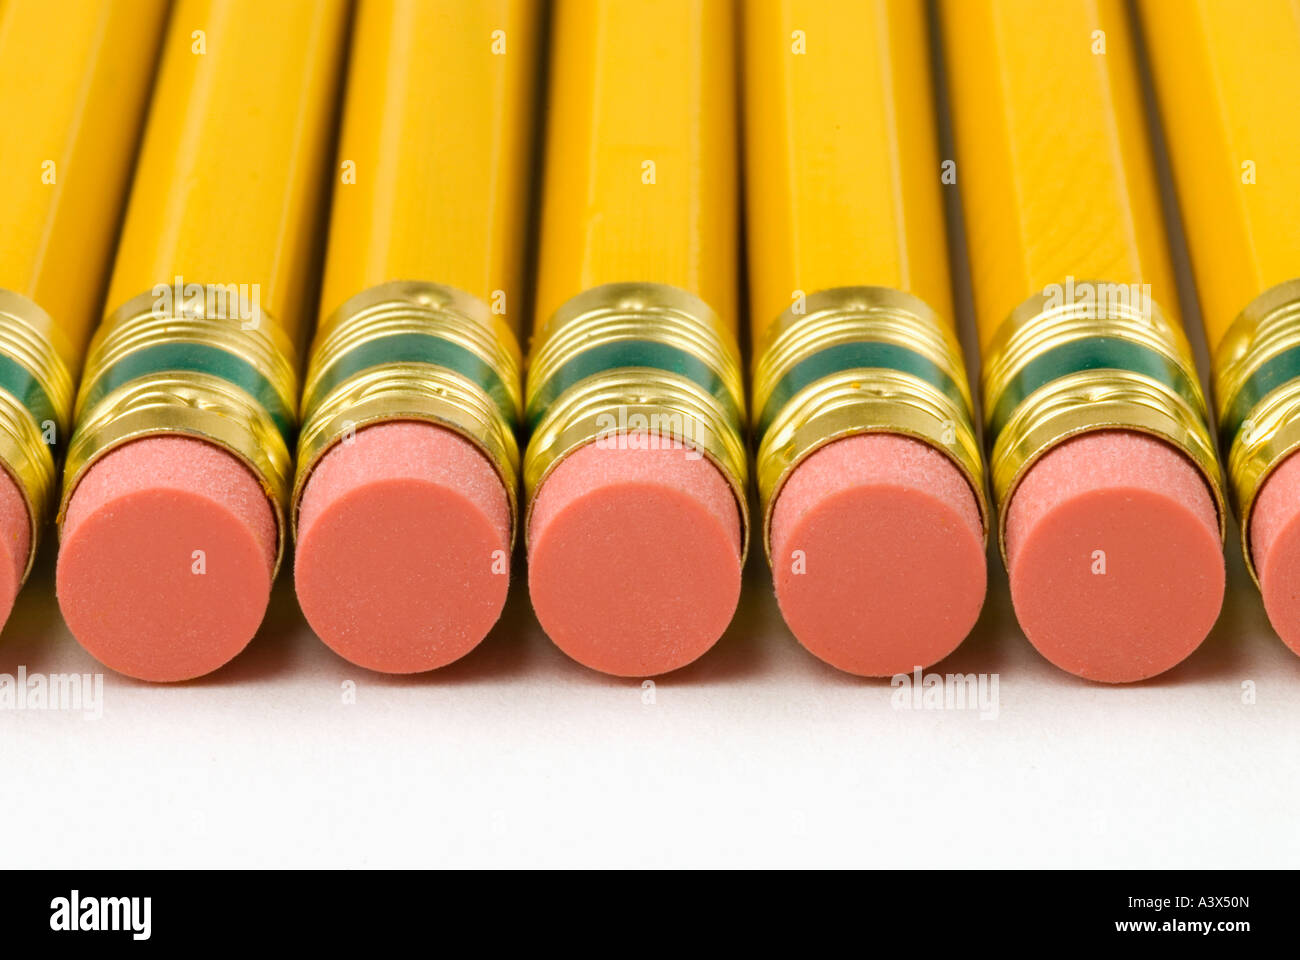 Pencil erasers in a row Stock Photo